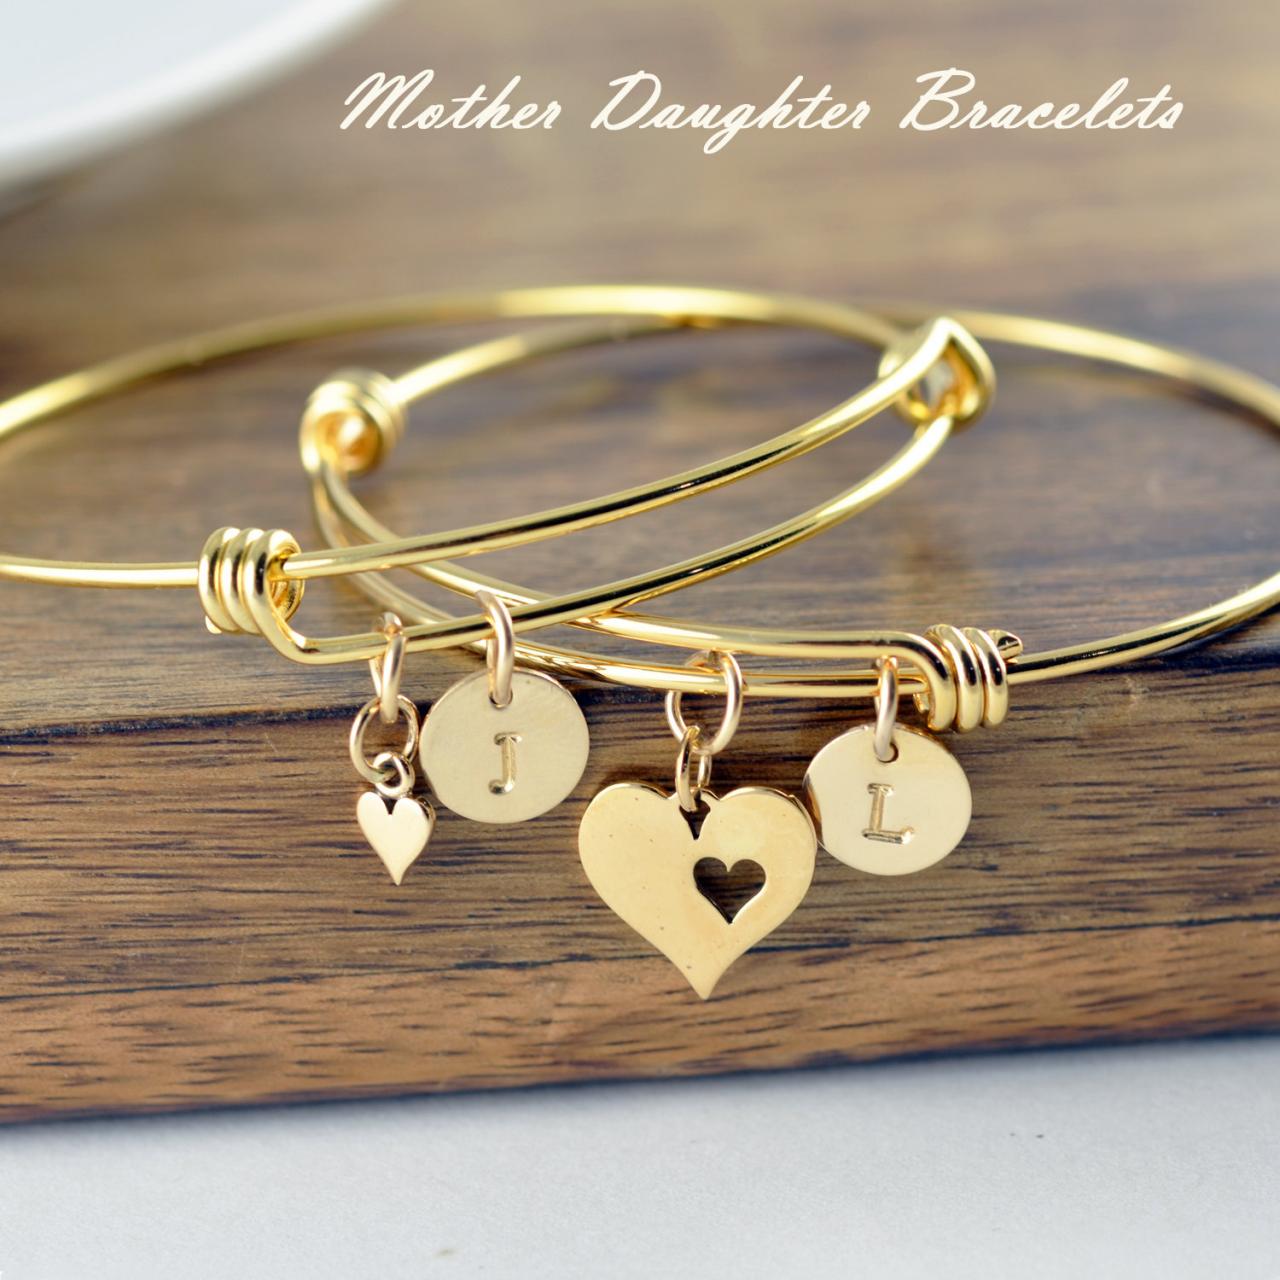 Bracelet Set, Mother Daughter Gift, Mother Daughter Bracelet, Gold Initial Bracelet, Mother Daughter Jewelry, Mothers Day From Daughter